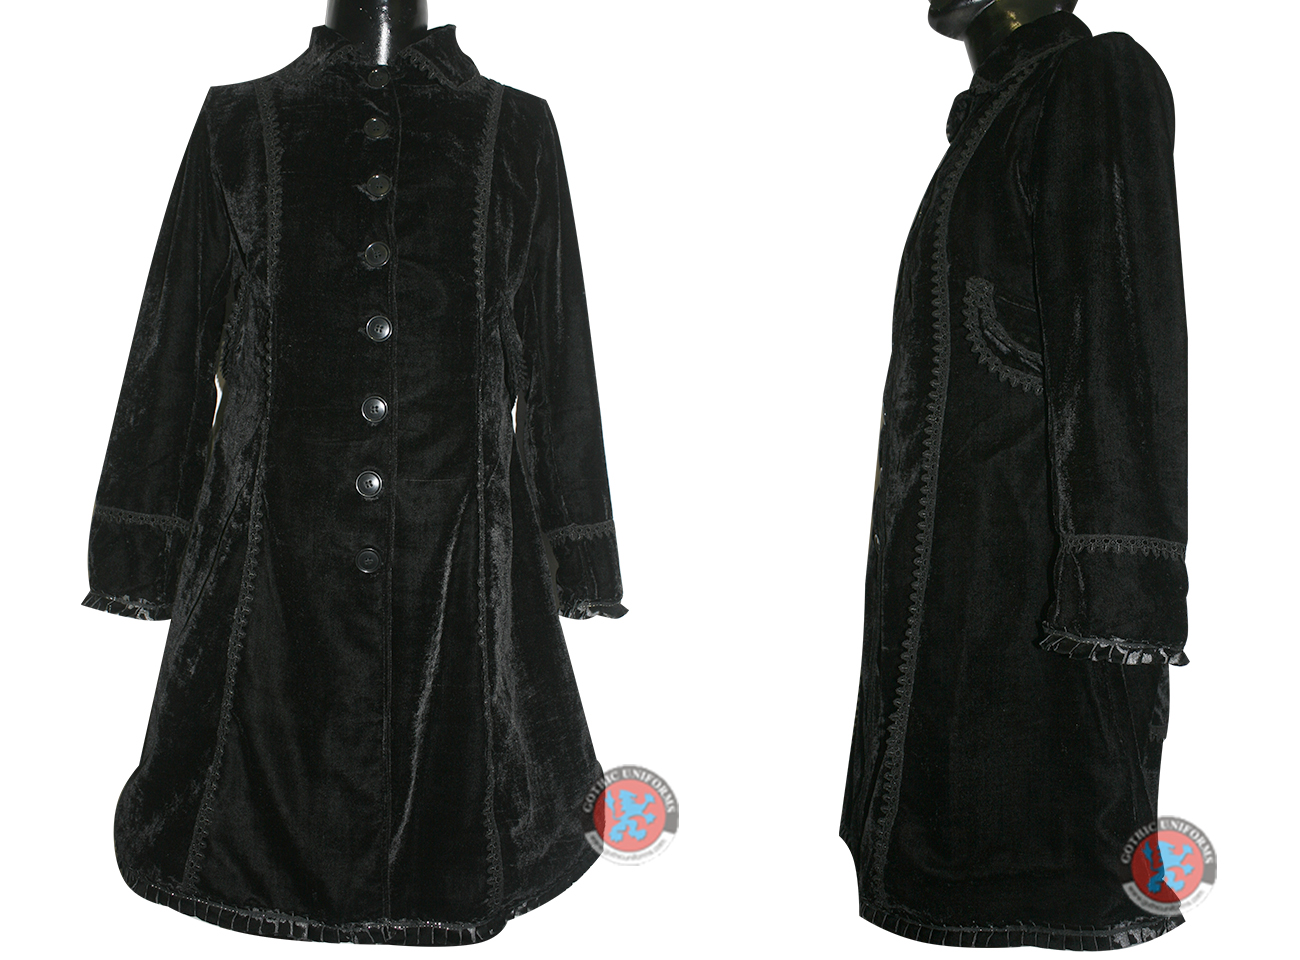 Black Color Velvet Ladies Long Coat with embroidery lace